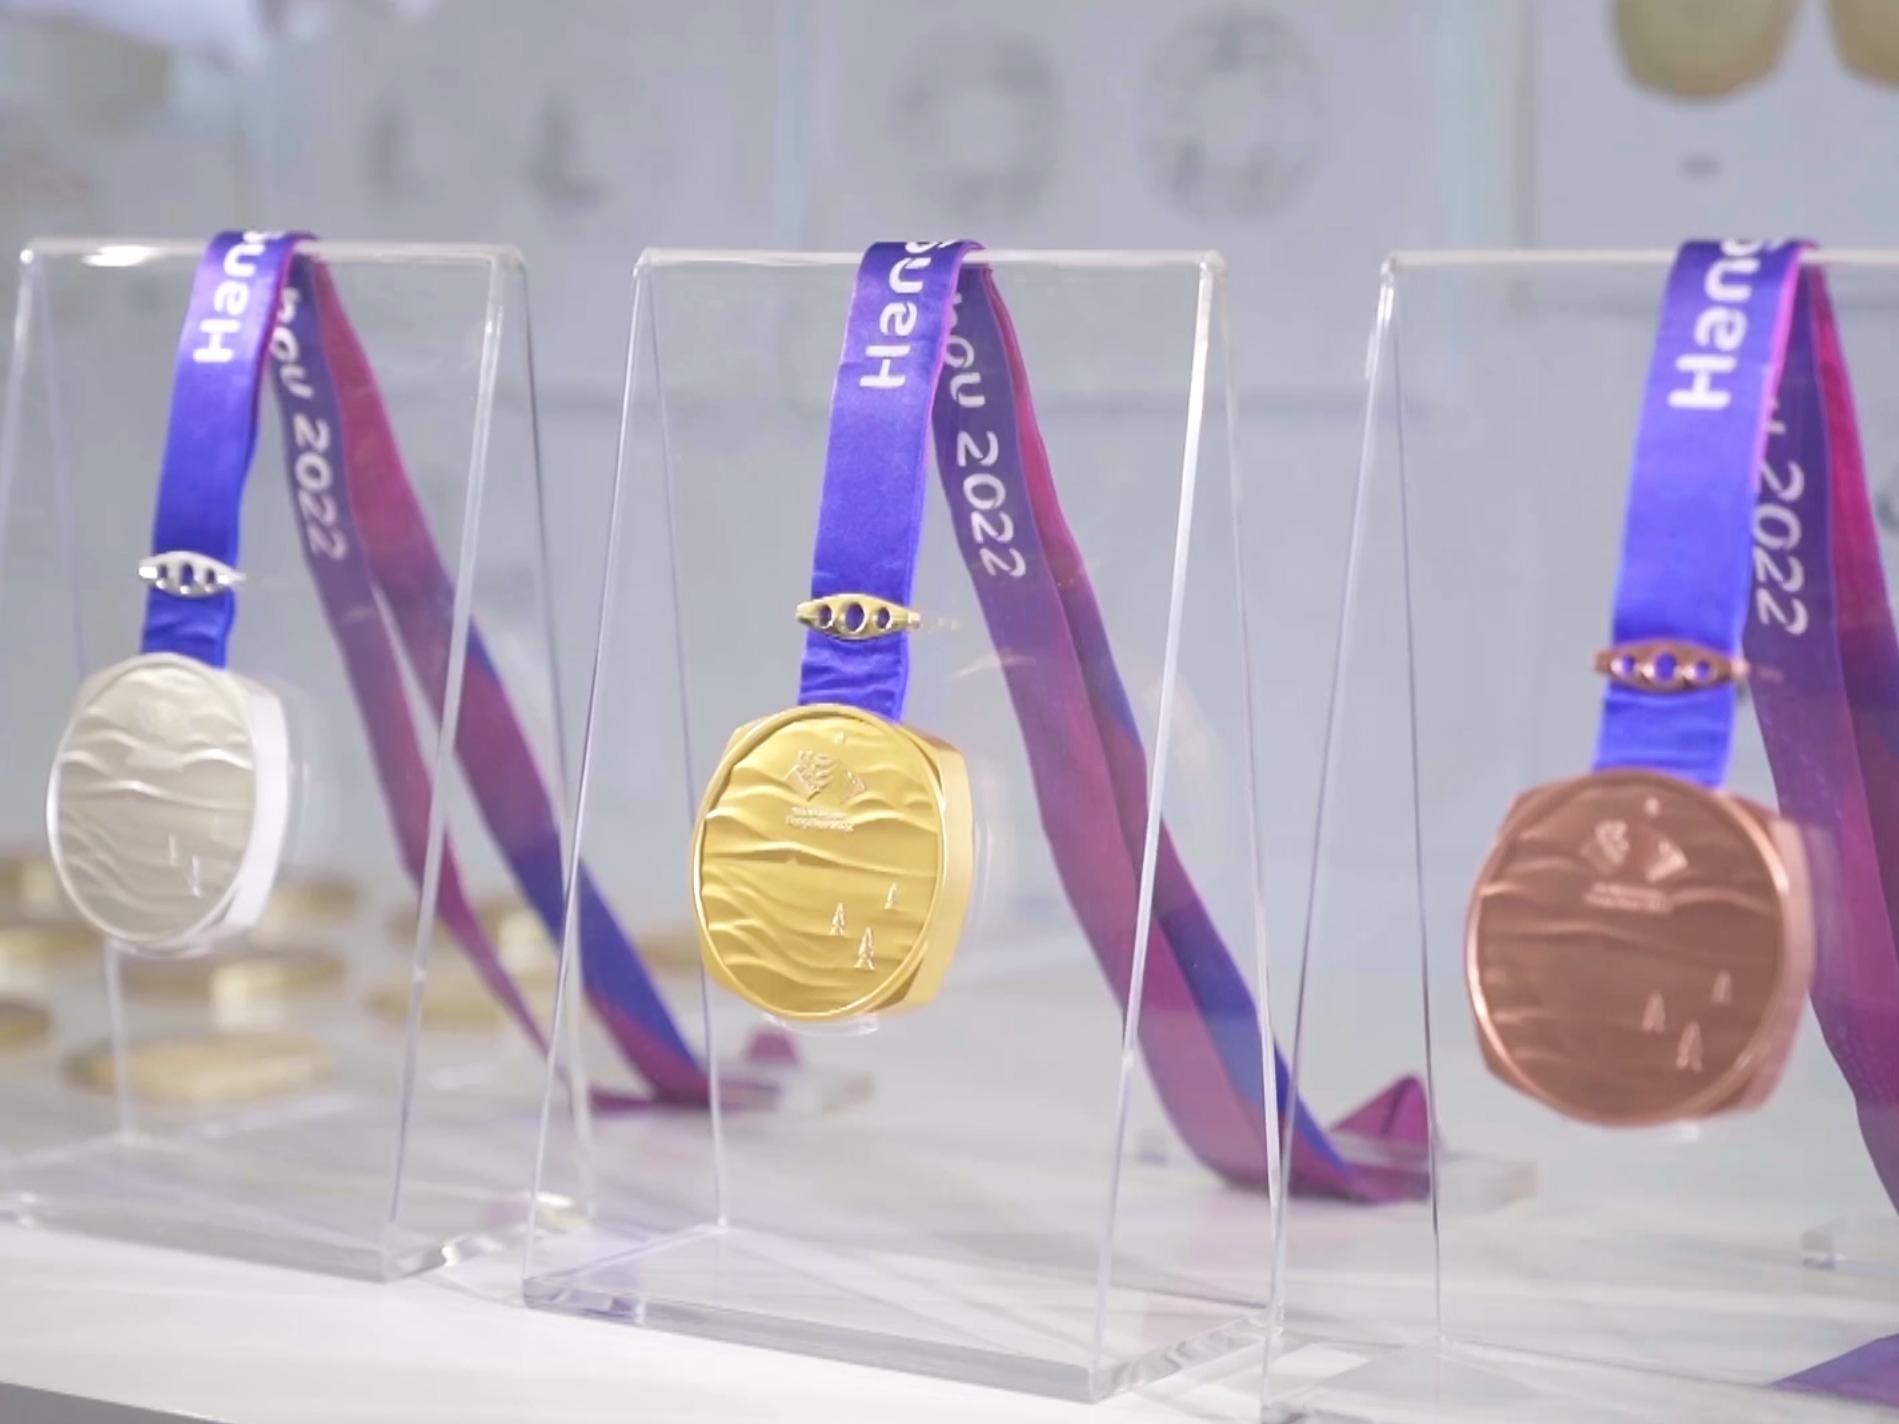 Hangzhou: From the past into the future | The inspired design of the Asian Games medals